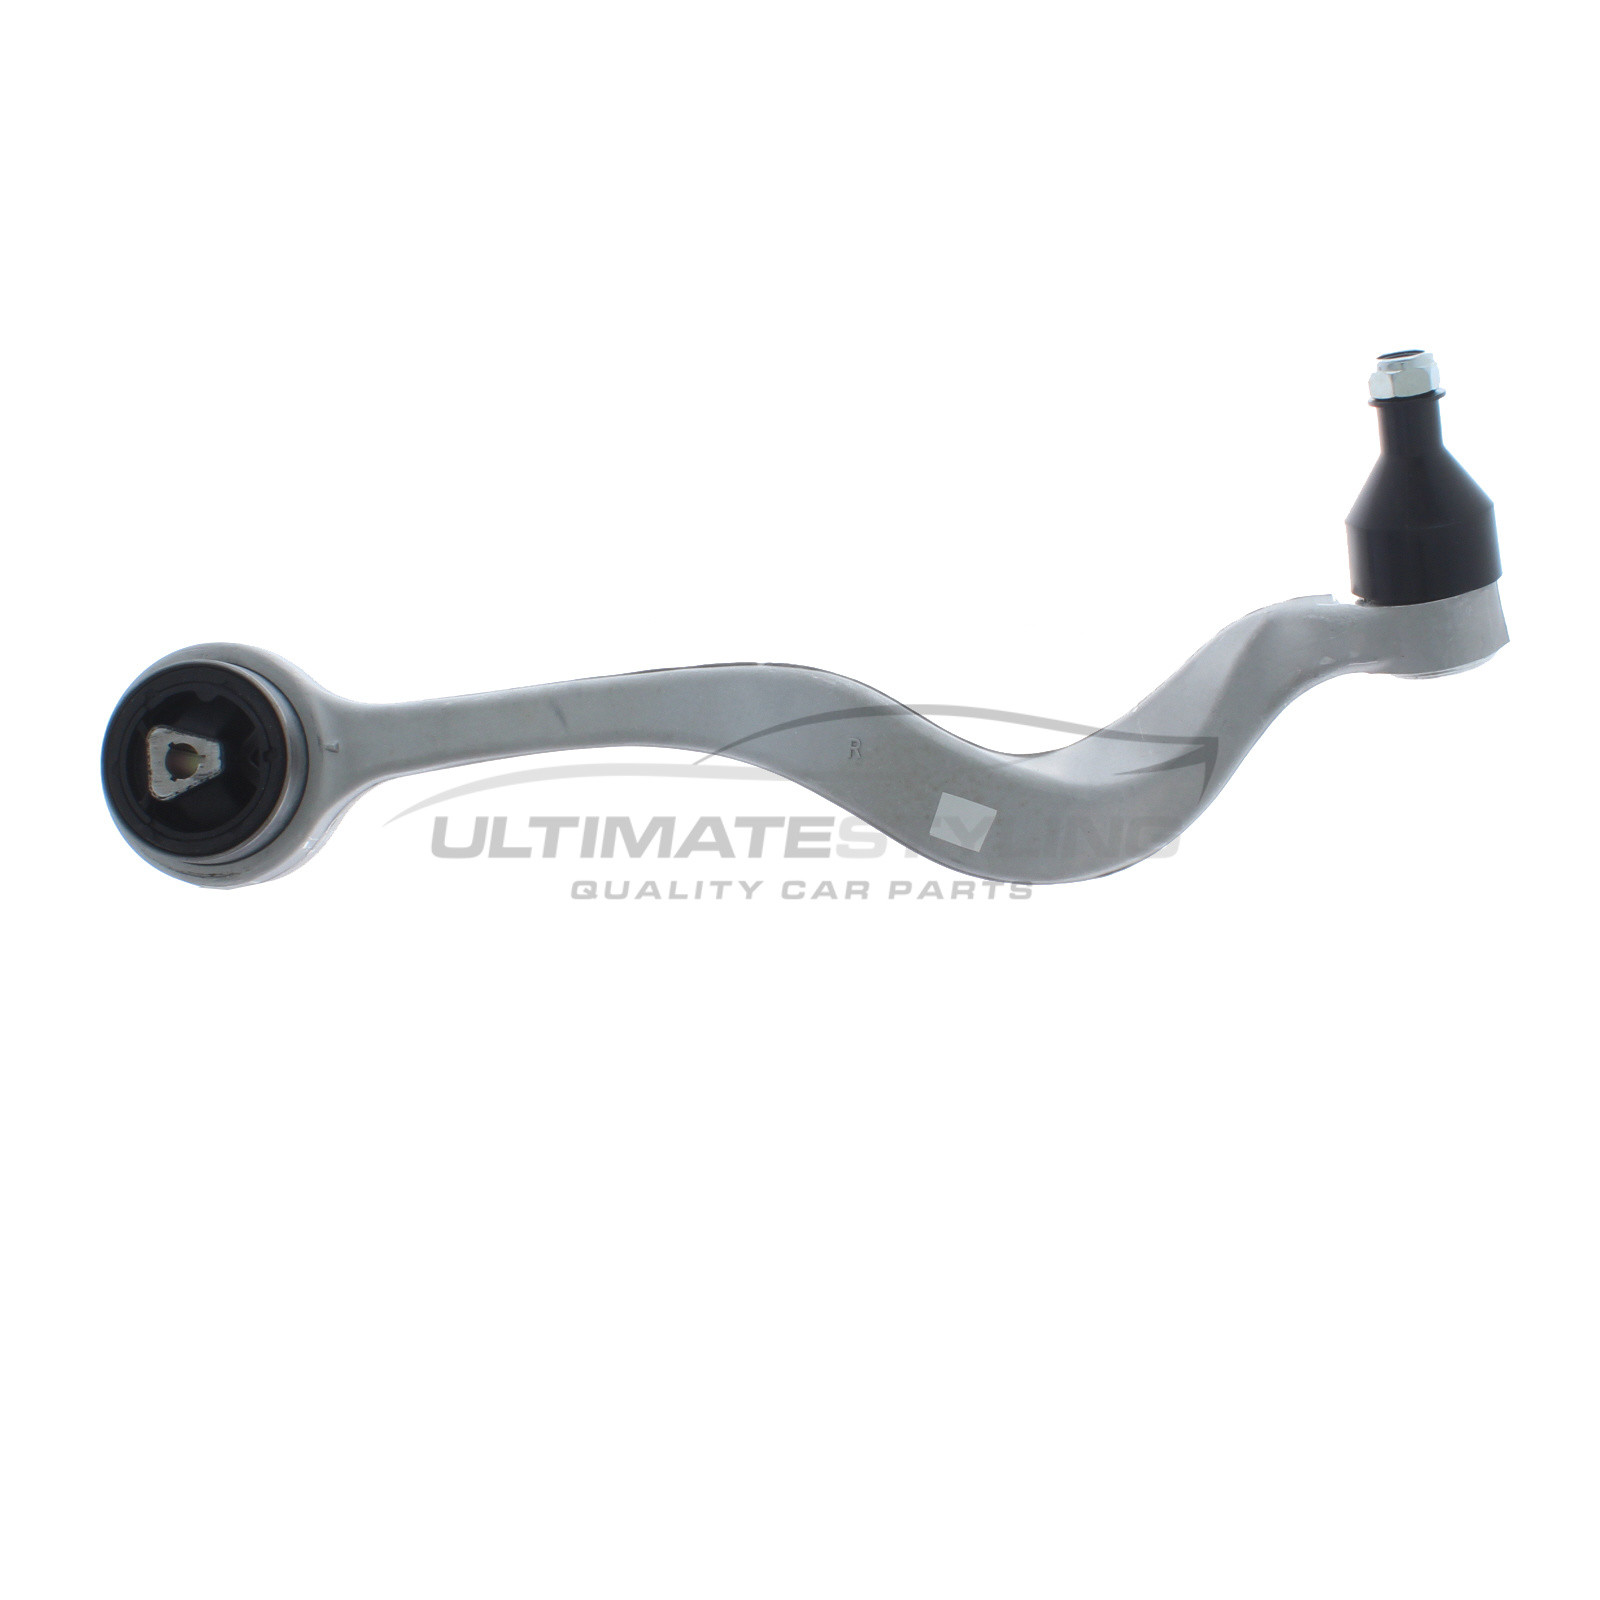 Suspension Arm for BMW 5 Series